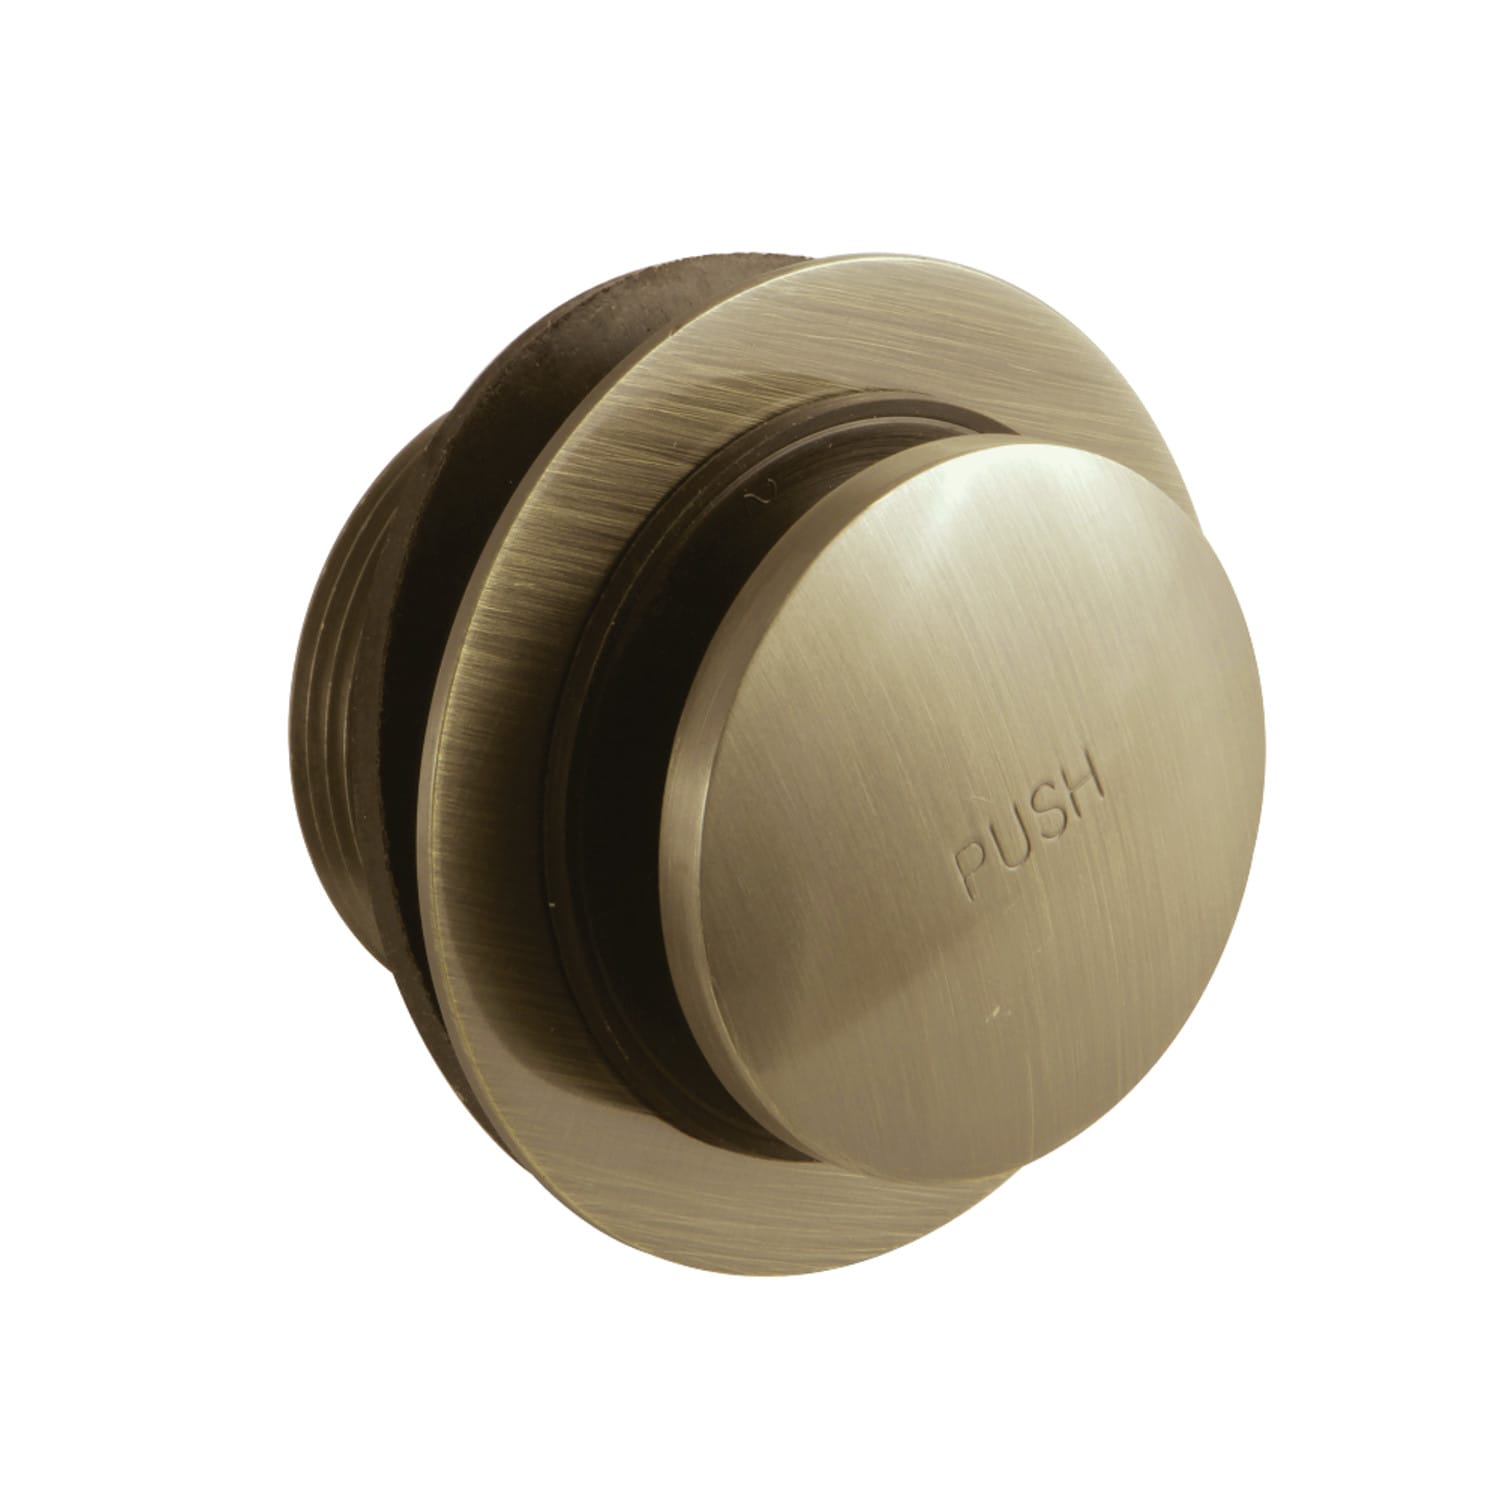 Oil Rubbed Bronze Details about   Kingston Brass DTT205 Made to Match Tip-Toe Bathtub Drain 